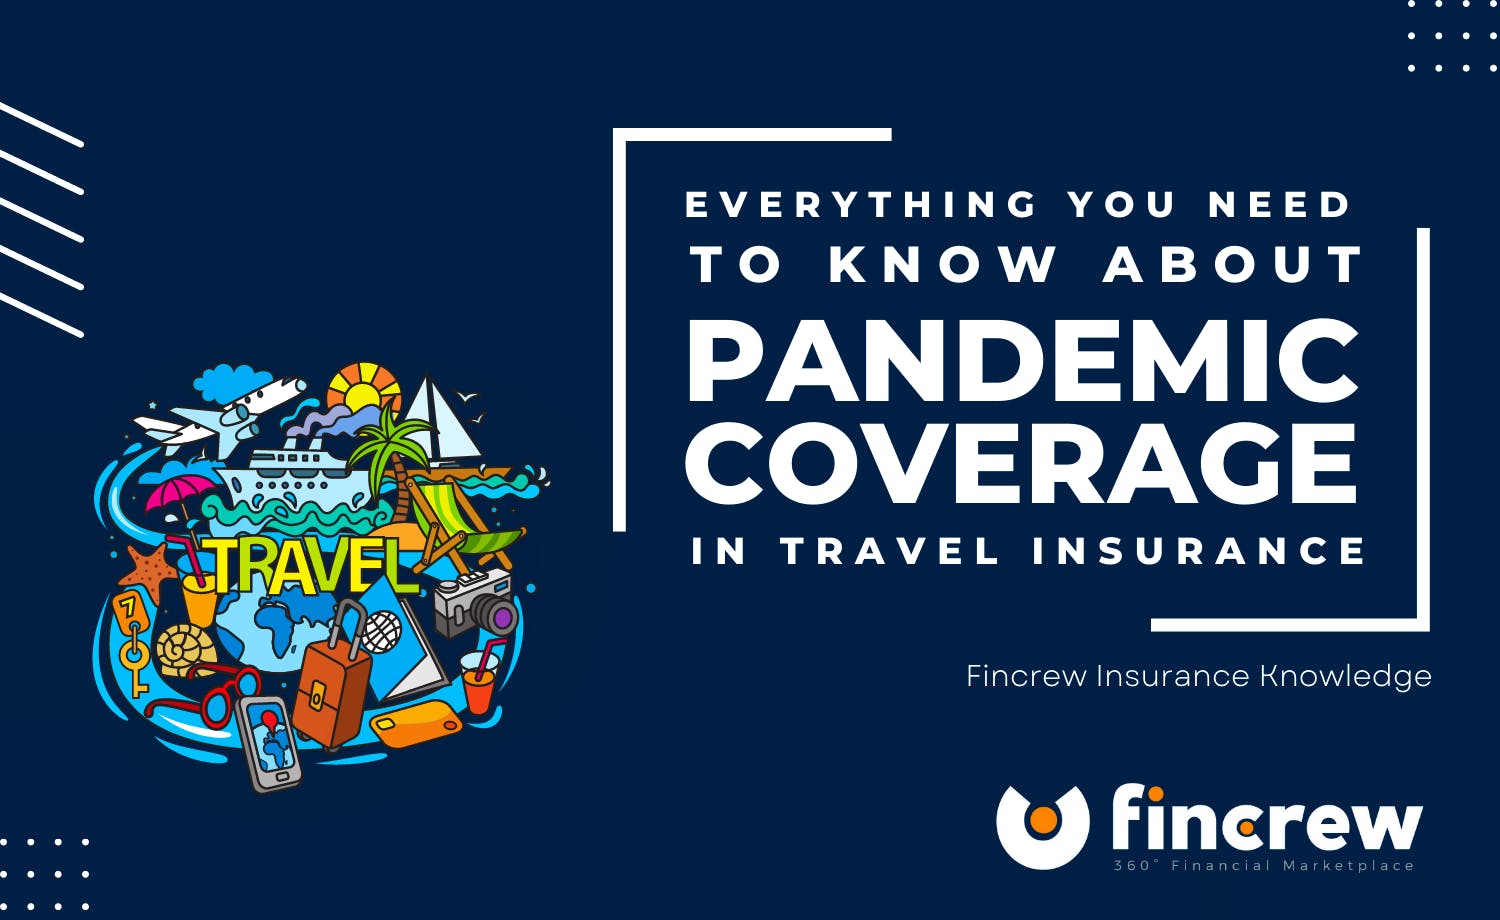 Everything You Need To Know About Pandemic Cover In Travel Insurance